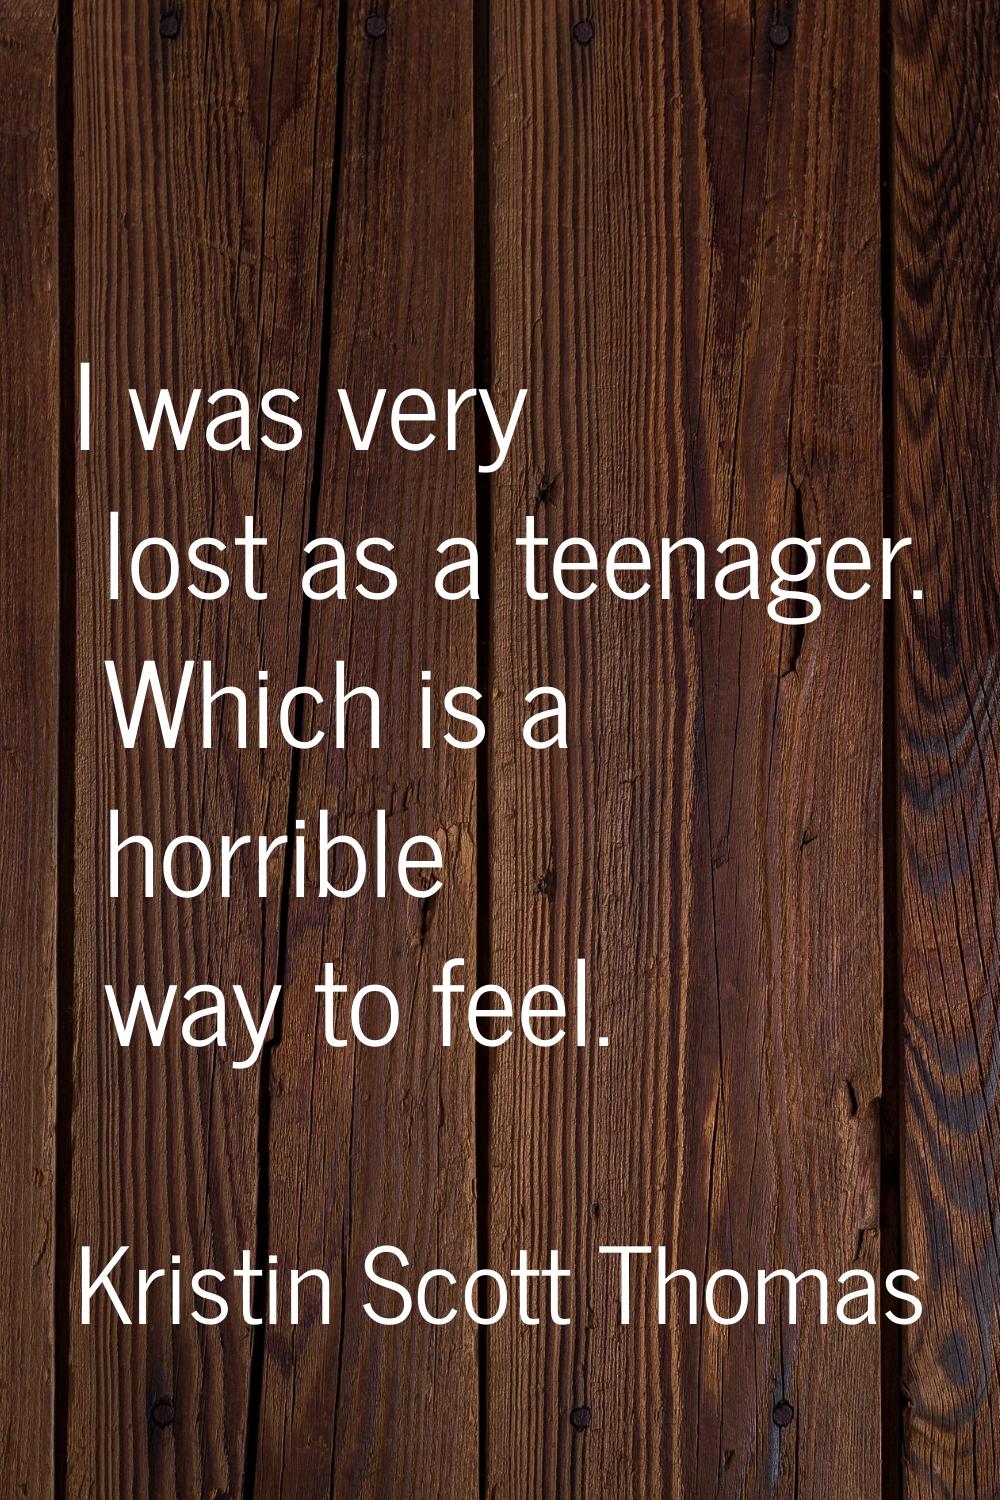 I was very lost as a teenager. Which is a horrible way to feel.